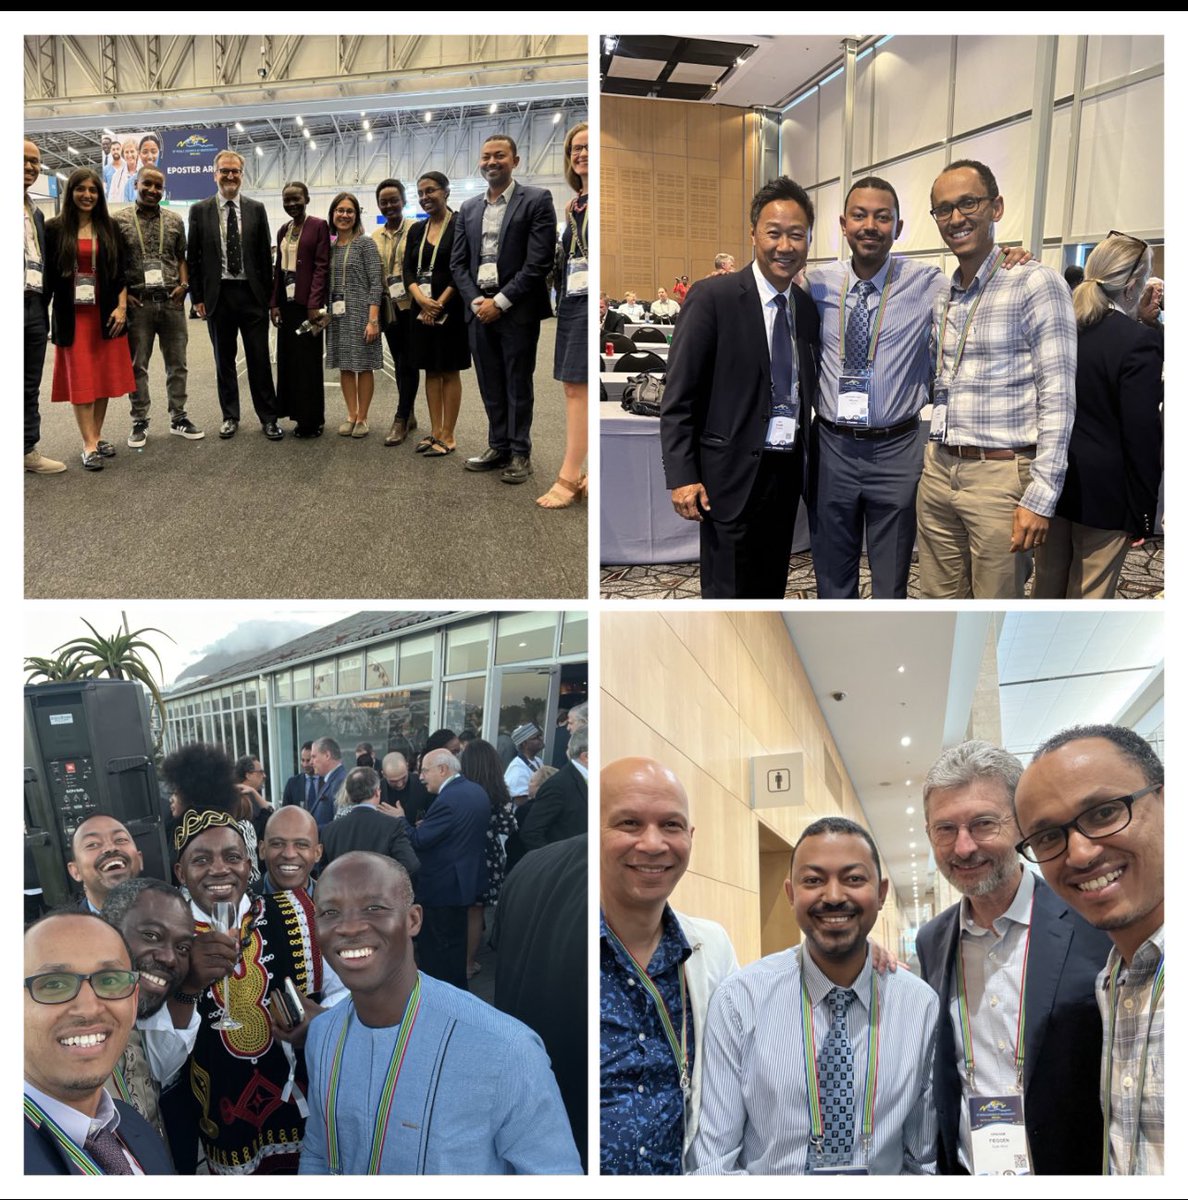 #WFNS2023 has been excellent. It was great reconnecting with friends and learning from a very educative scientific program.Thank you very much Prof Fieggen and Tony for such an amazing meeting.Special thanks for @keepark for always supporting us!